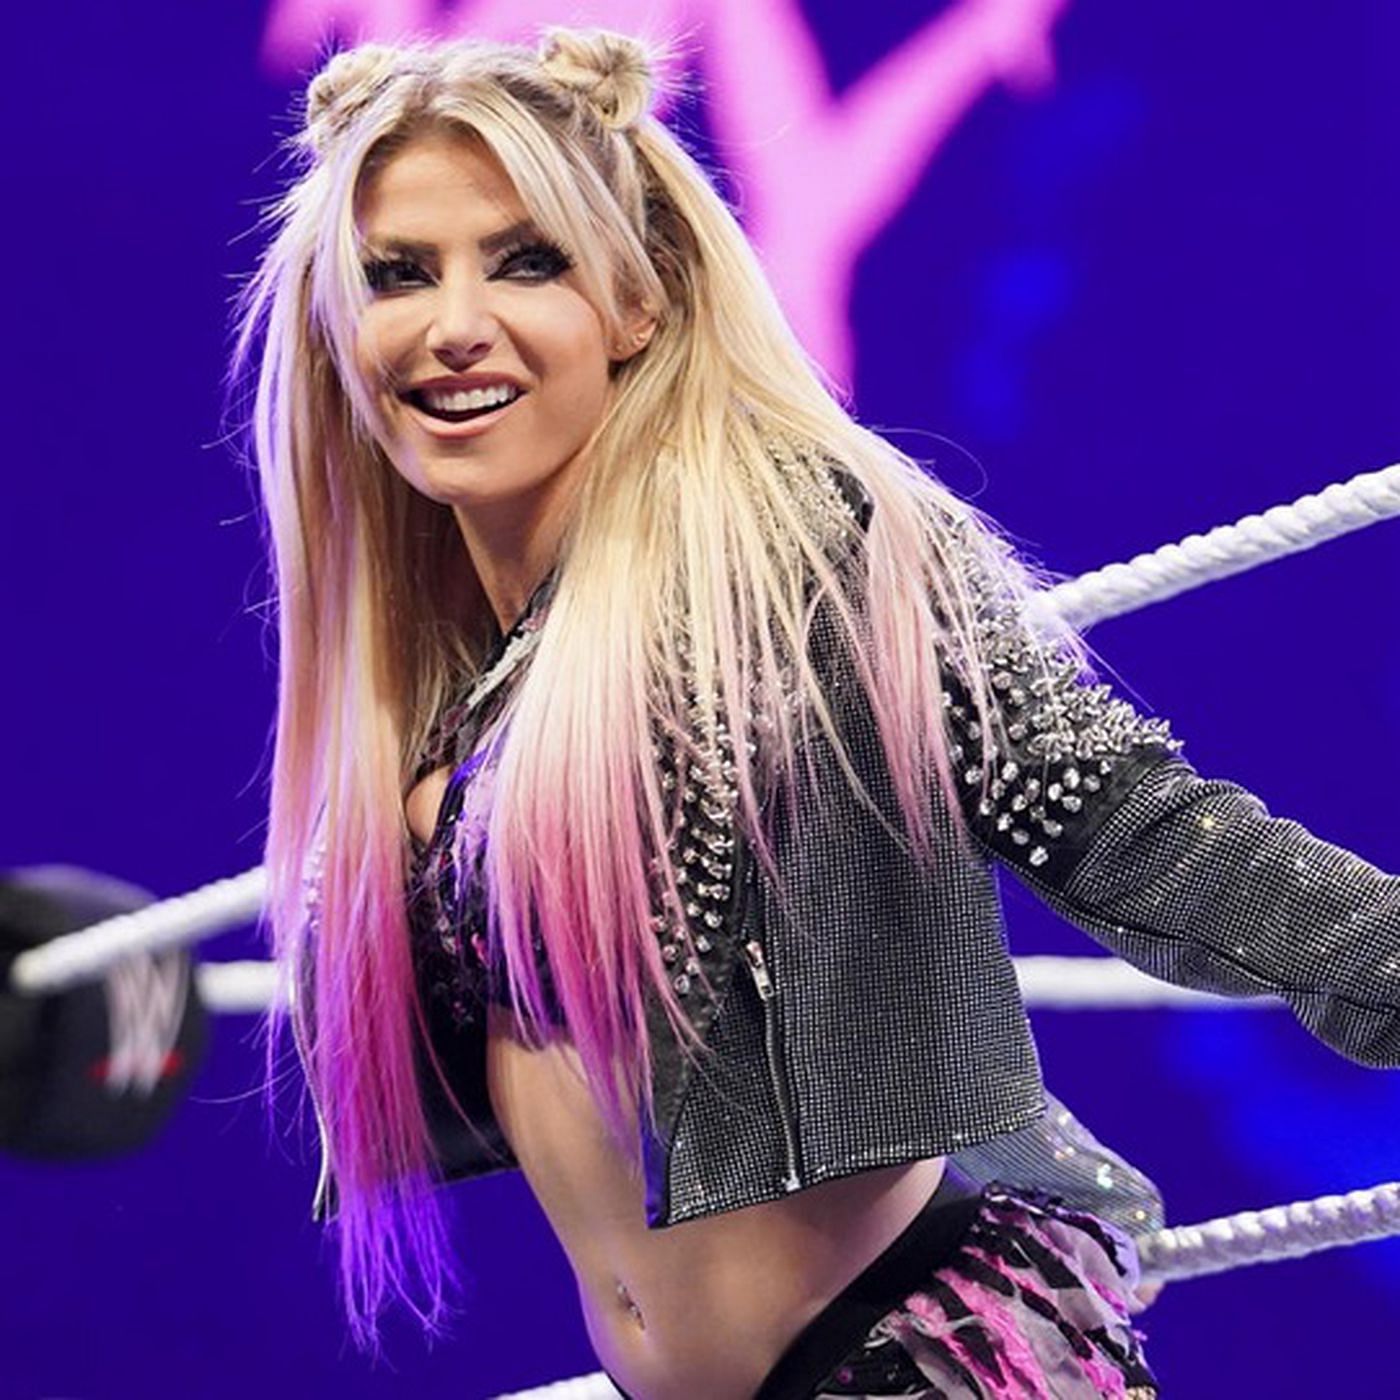 What happened to WWE star Alexa Bliss? Medical update shared